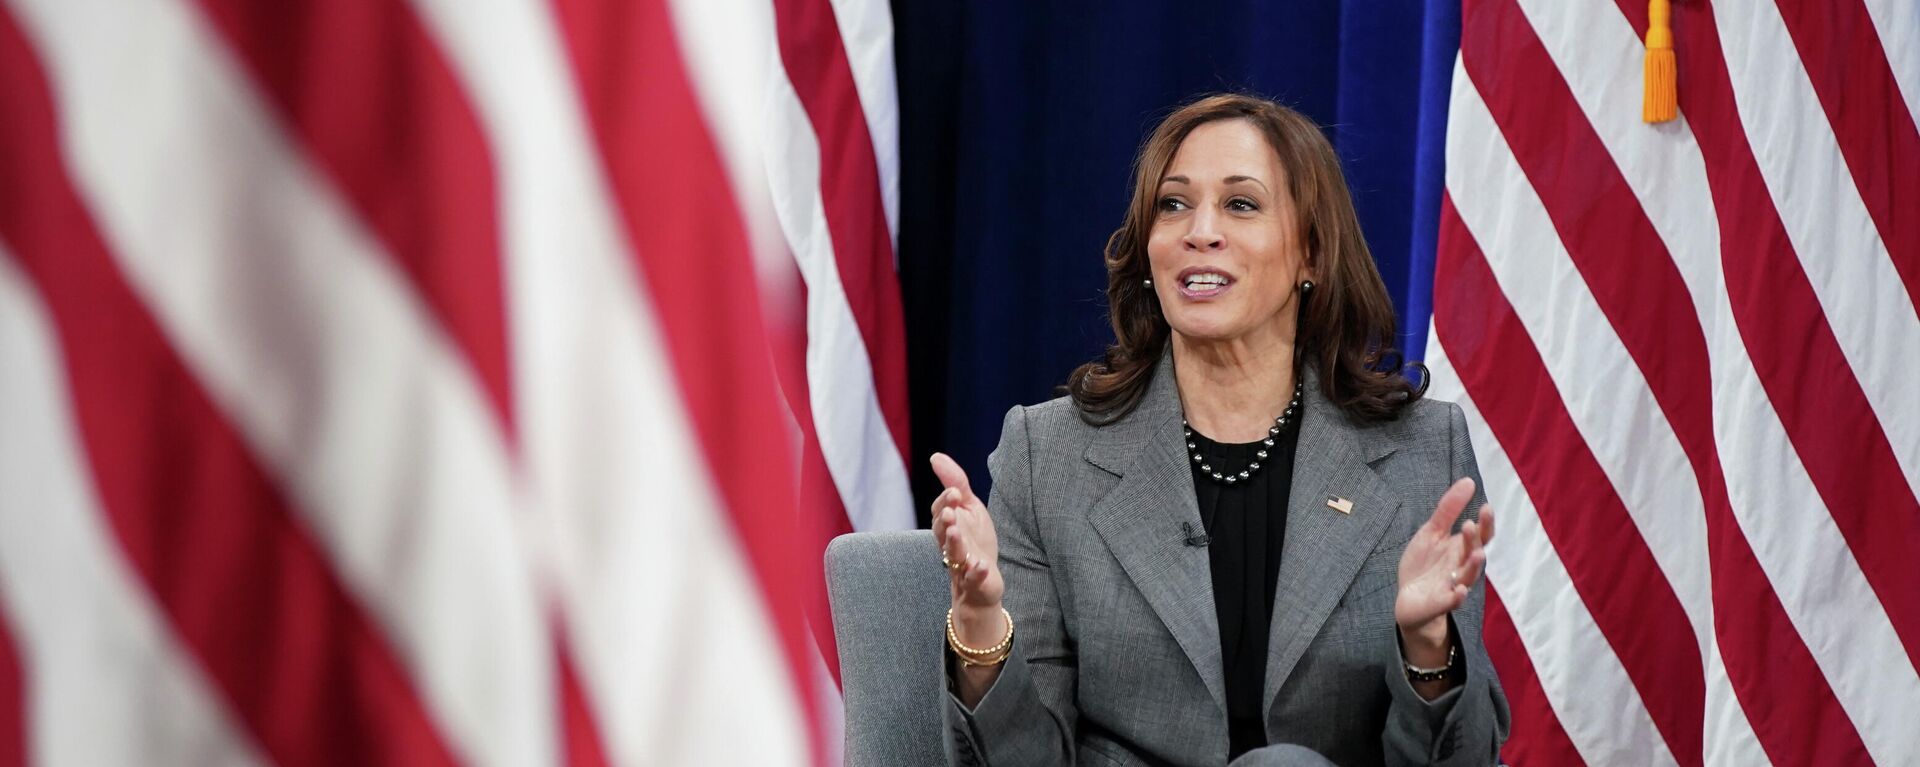 U.S. Vice President Kamala Harris holds a discussion about maternal health with Allyson Felix, five-time U.S. Olympian, at the White House in Washington, U.S. December 7, 2021. - Sputnik International, 1920, 26.12.2021